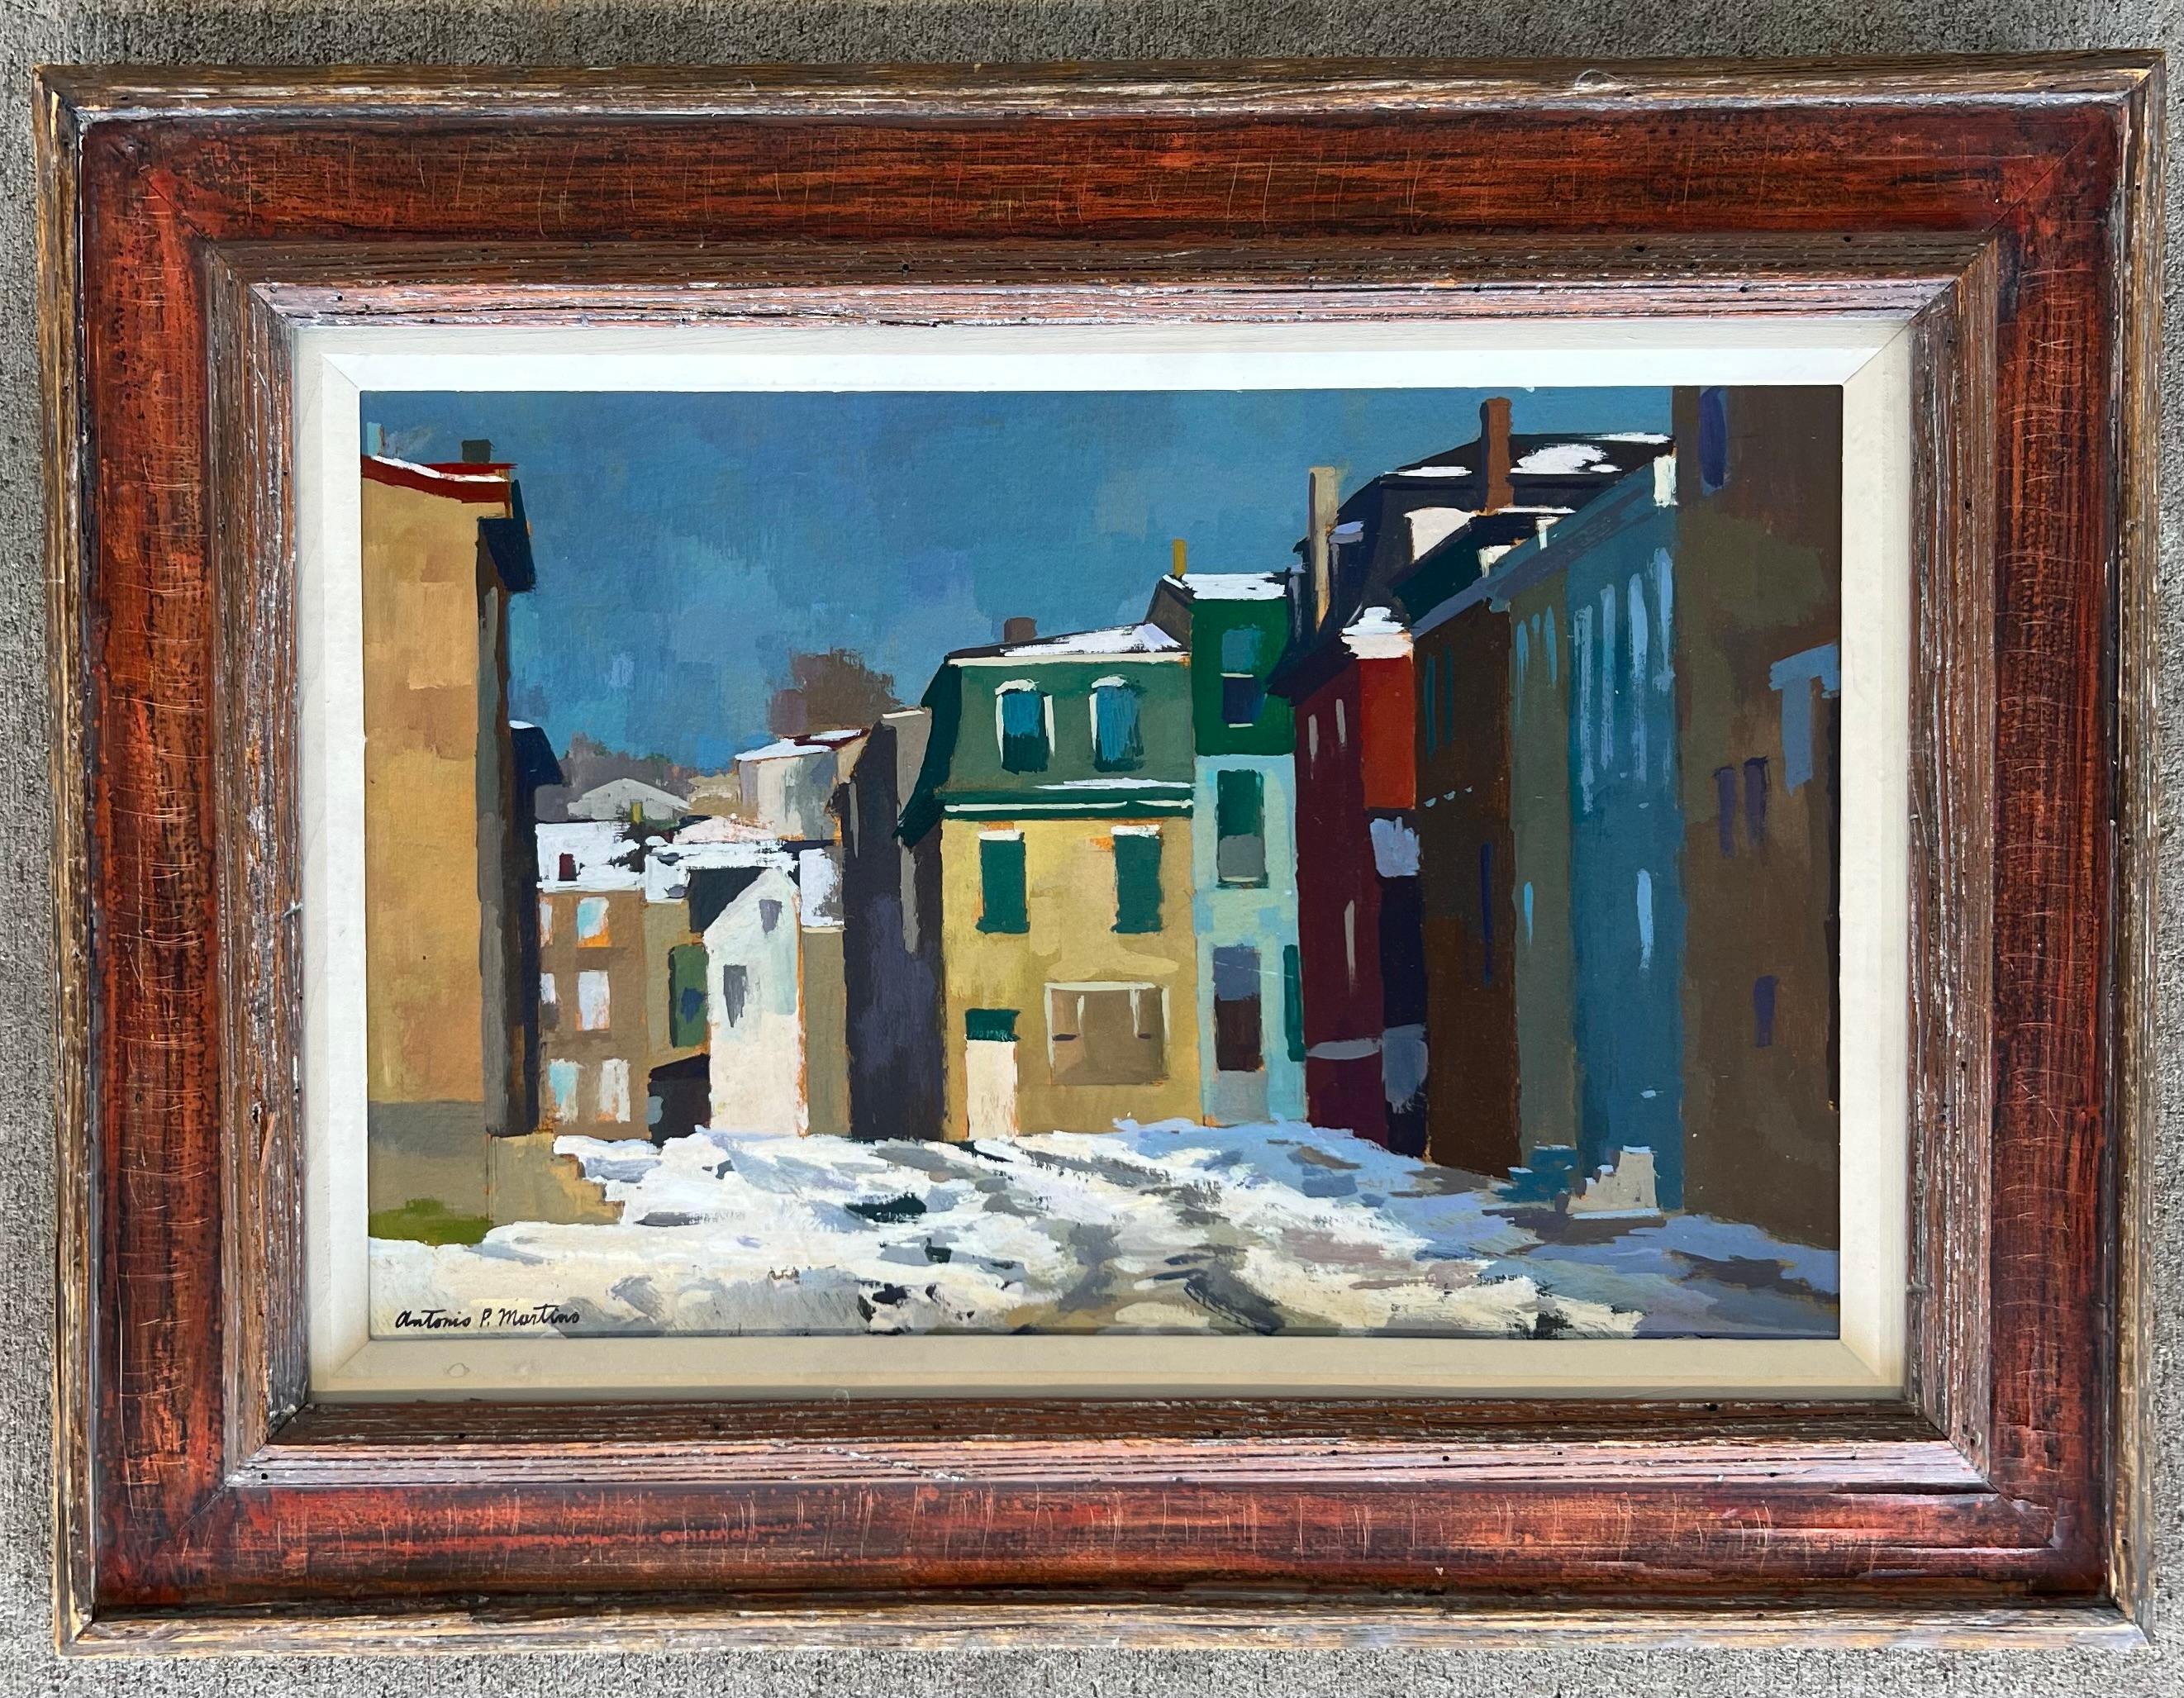 Oil on canvas board, signed lower left and inscribed on the reverse, as well as on the frame. This is most likely the original frame for this work made by the artist. 

Born in Philadelphia, Antonio P. Martino was the son of italian immigrants and